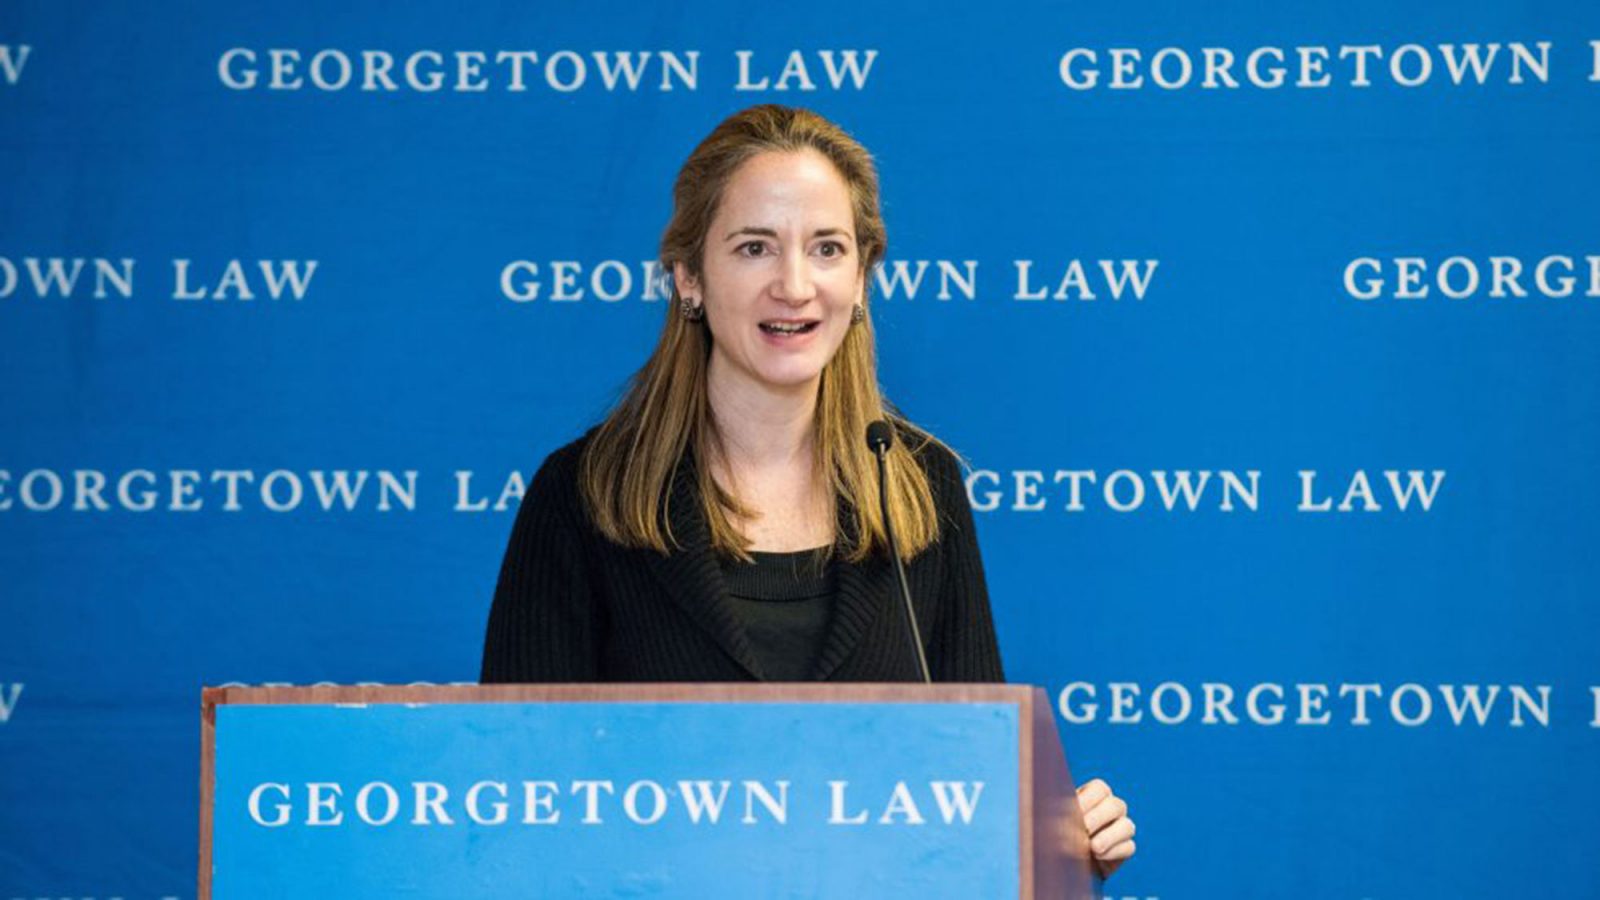 Avril Haines stands at a lectern with a microphone speaking in front of a blue Georgetown Law background.